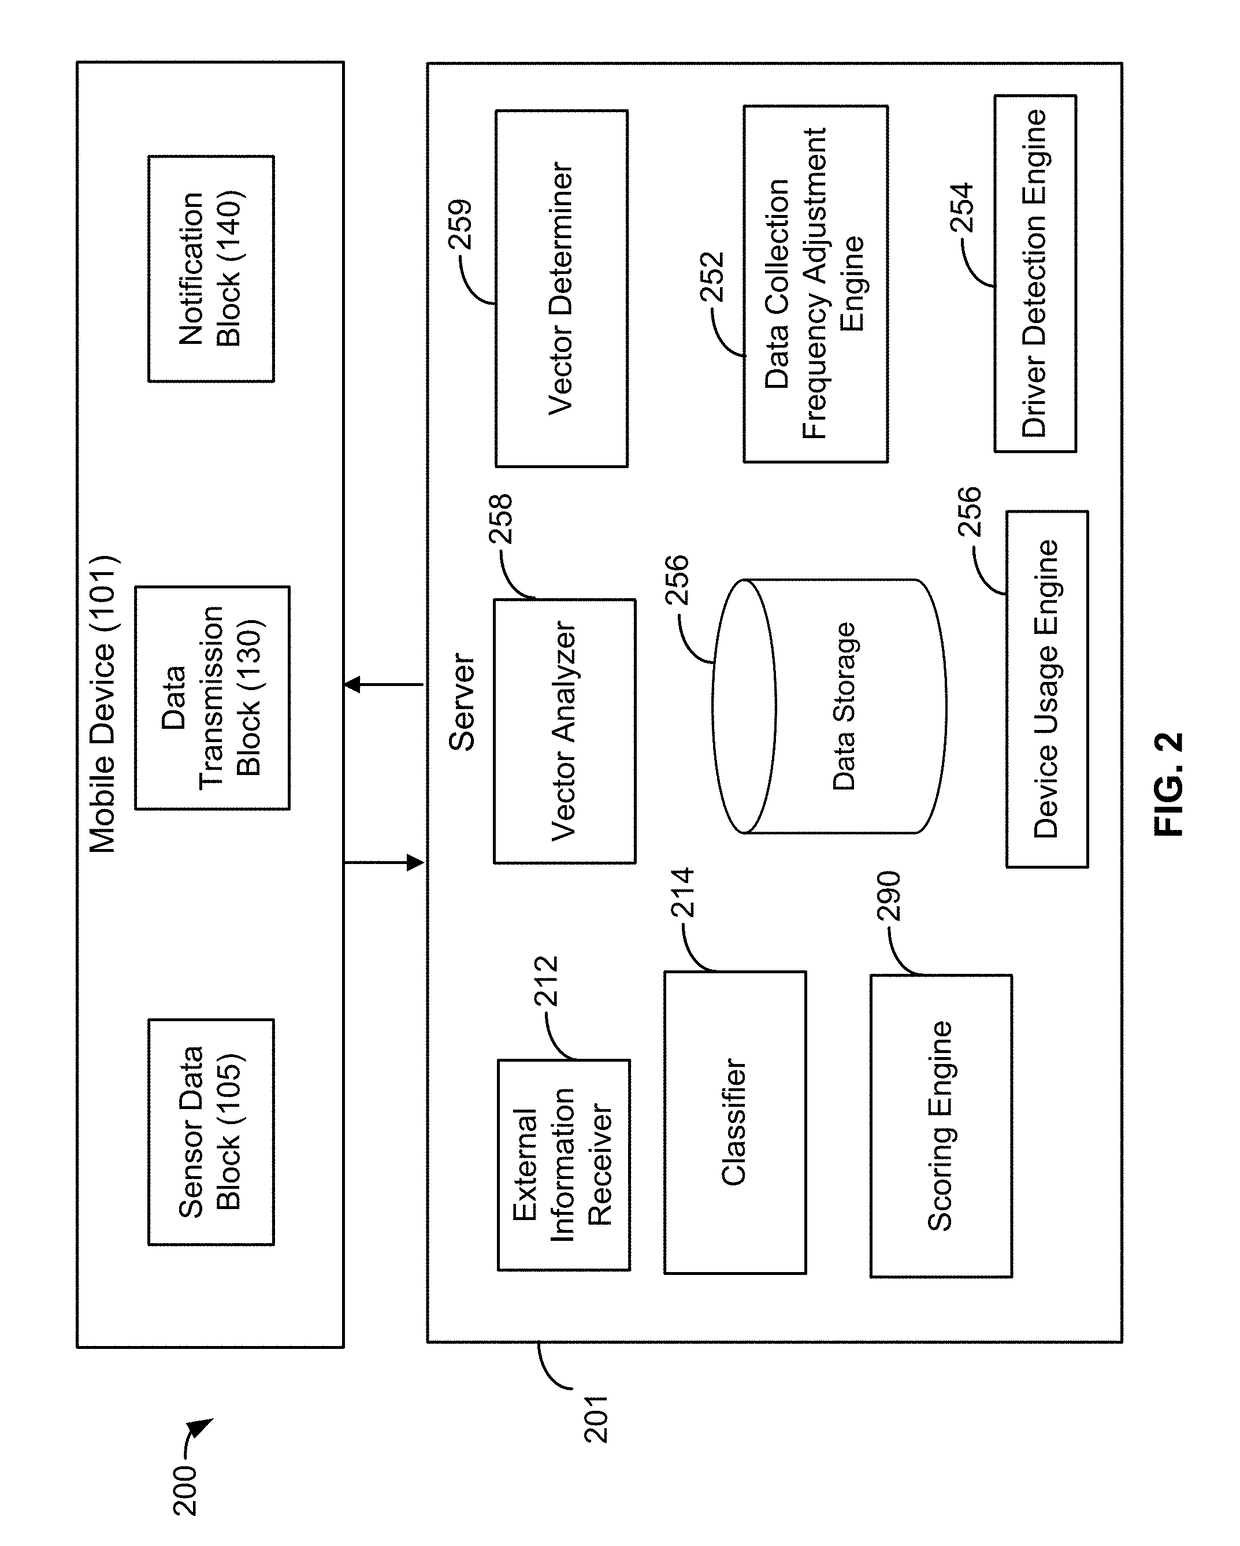 Systems and methods for detecting and assessing distracted drivers